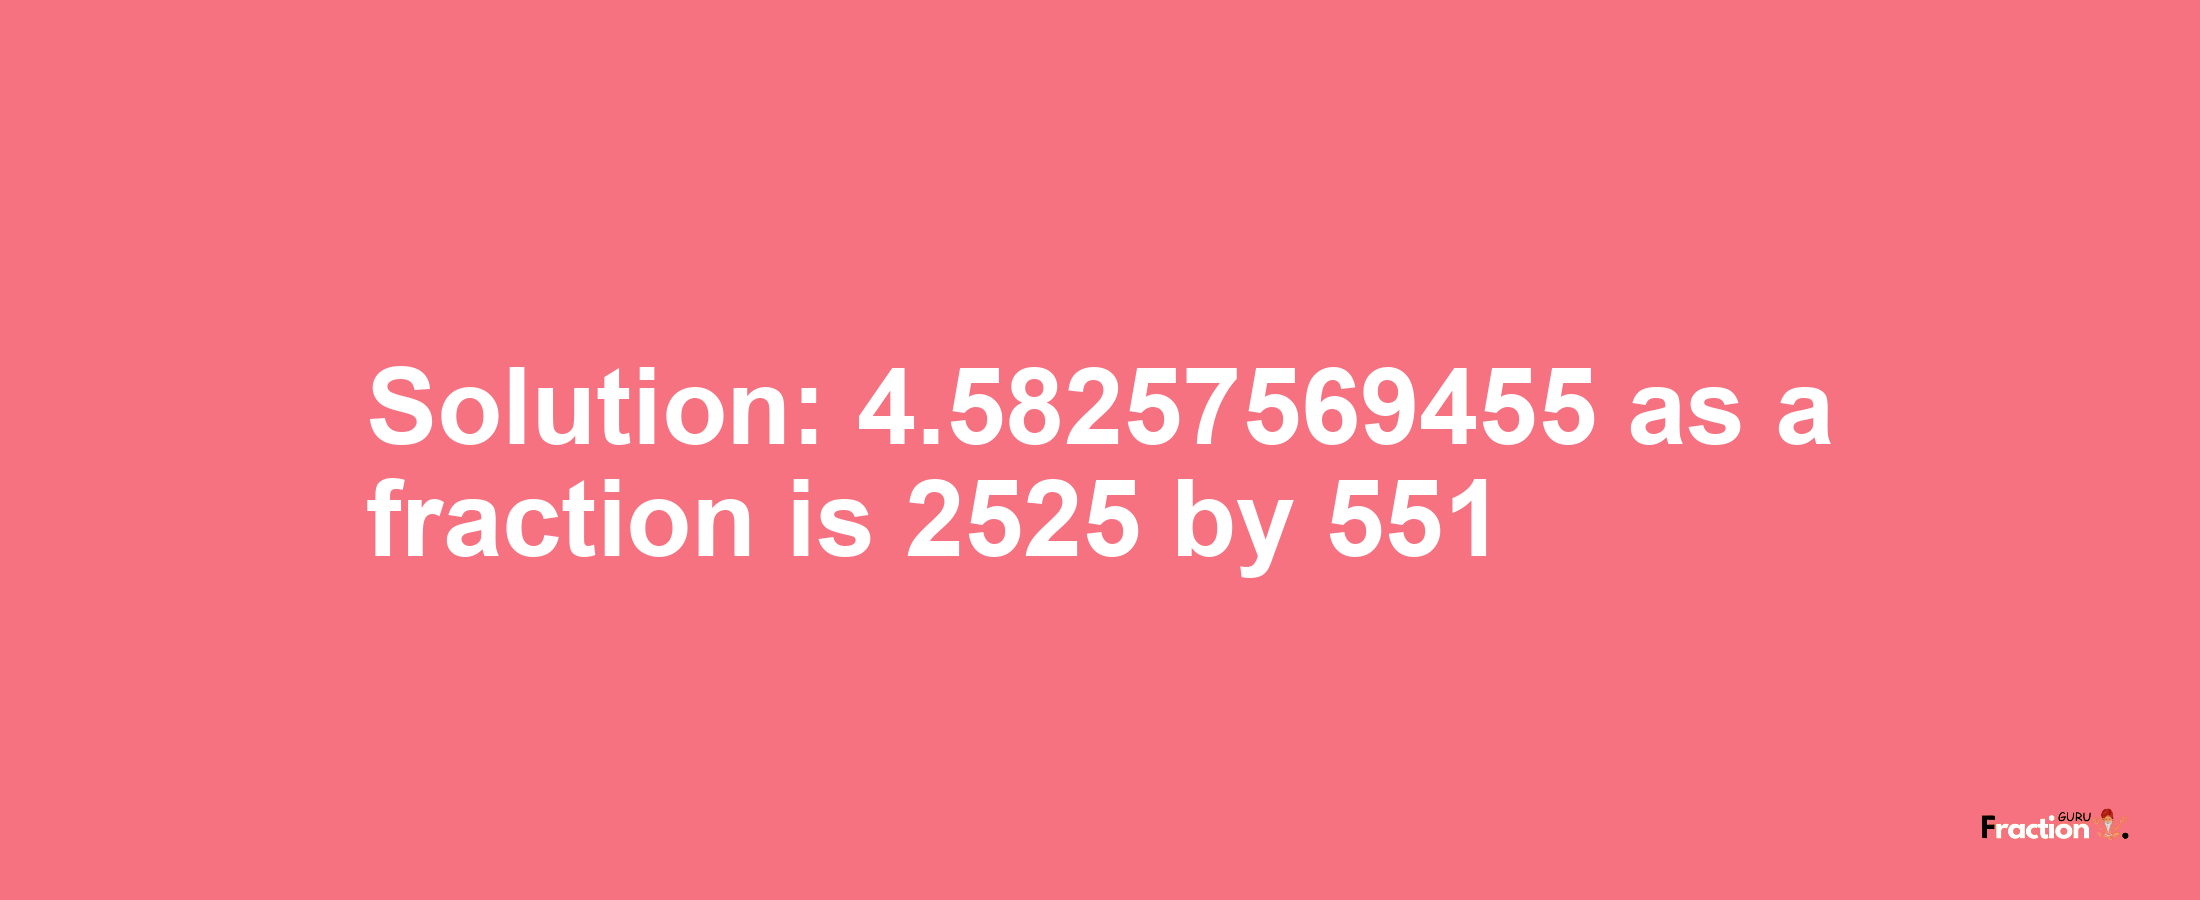 Solution:4.58257569455 as a fraction is 2525/551